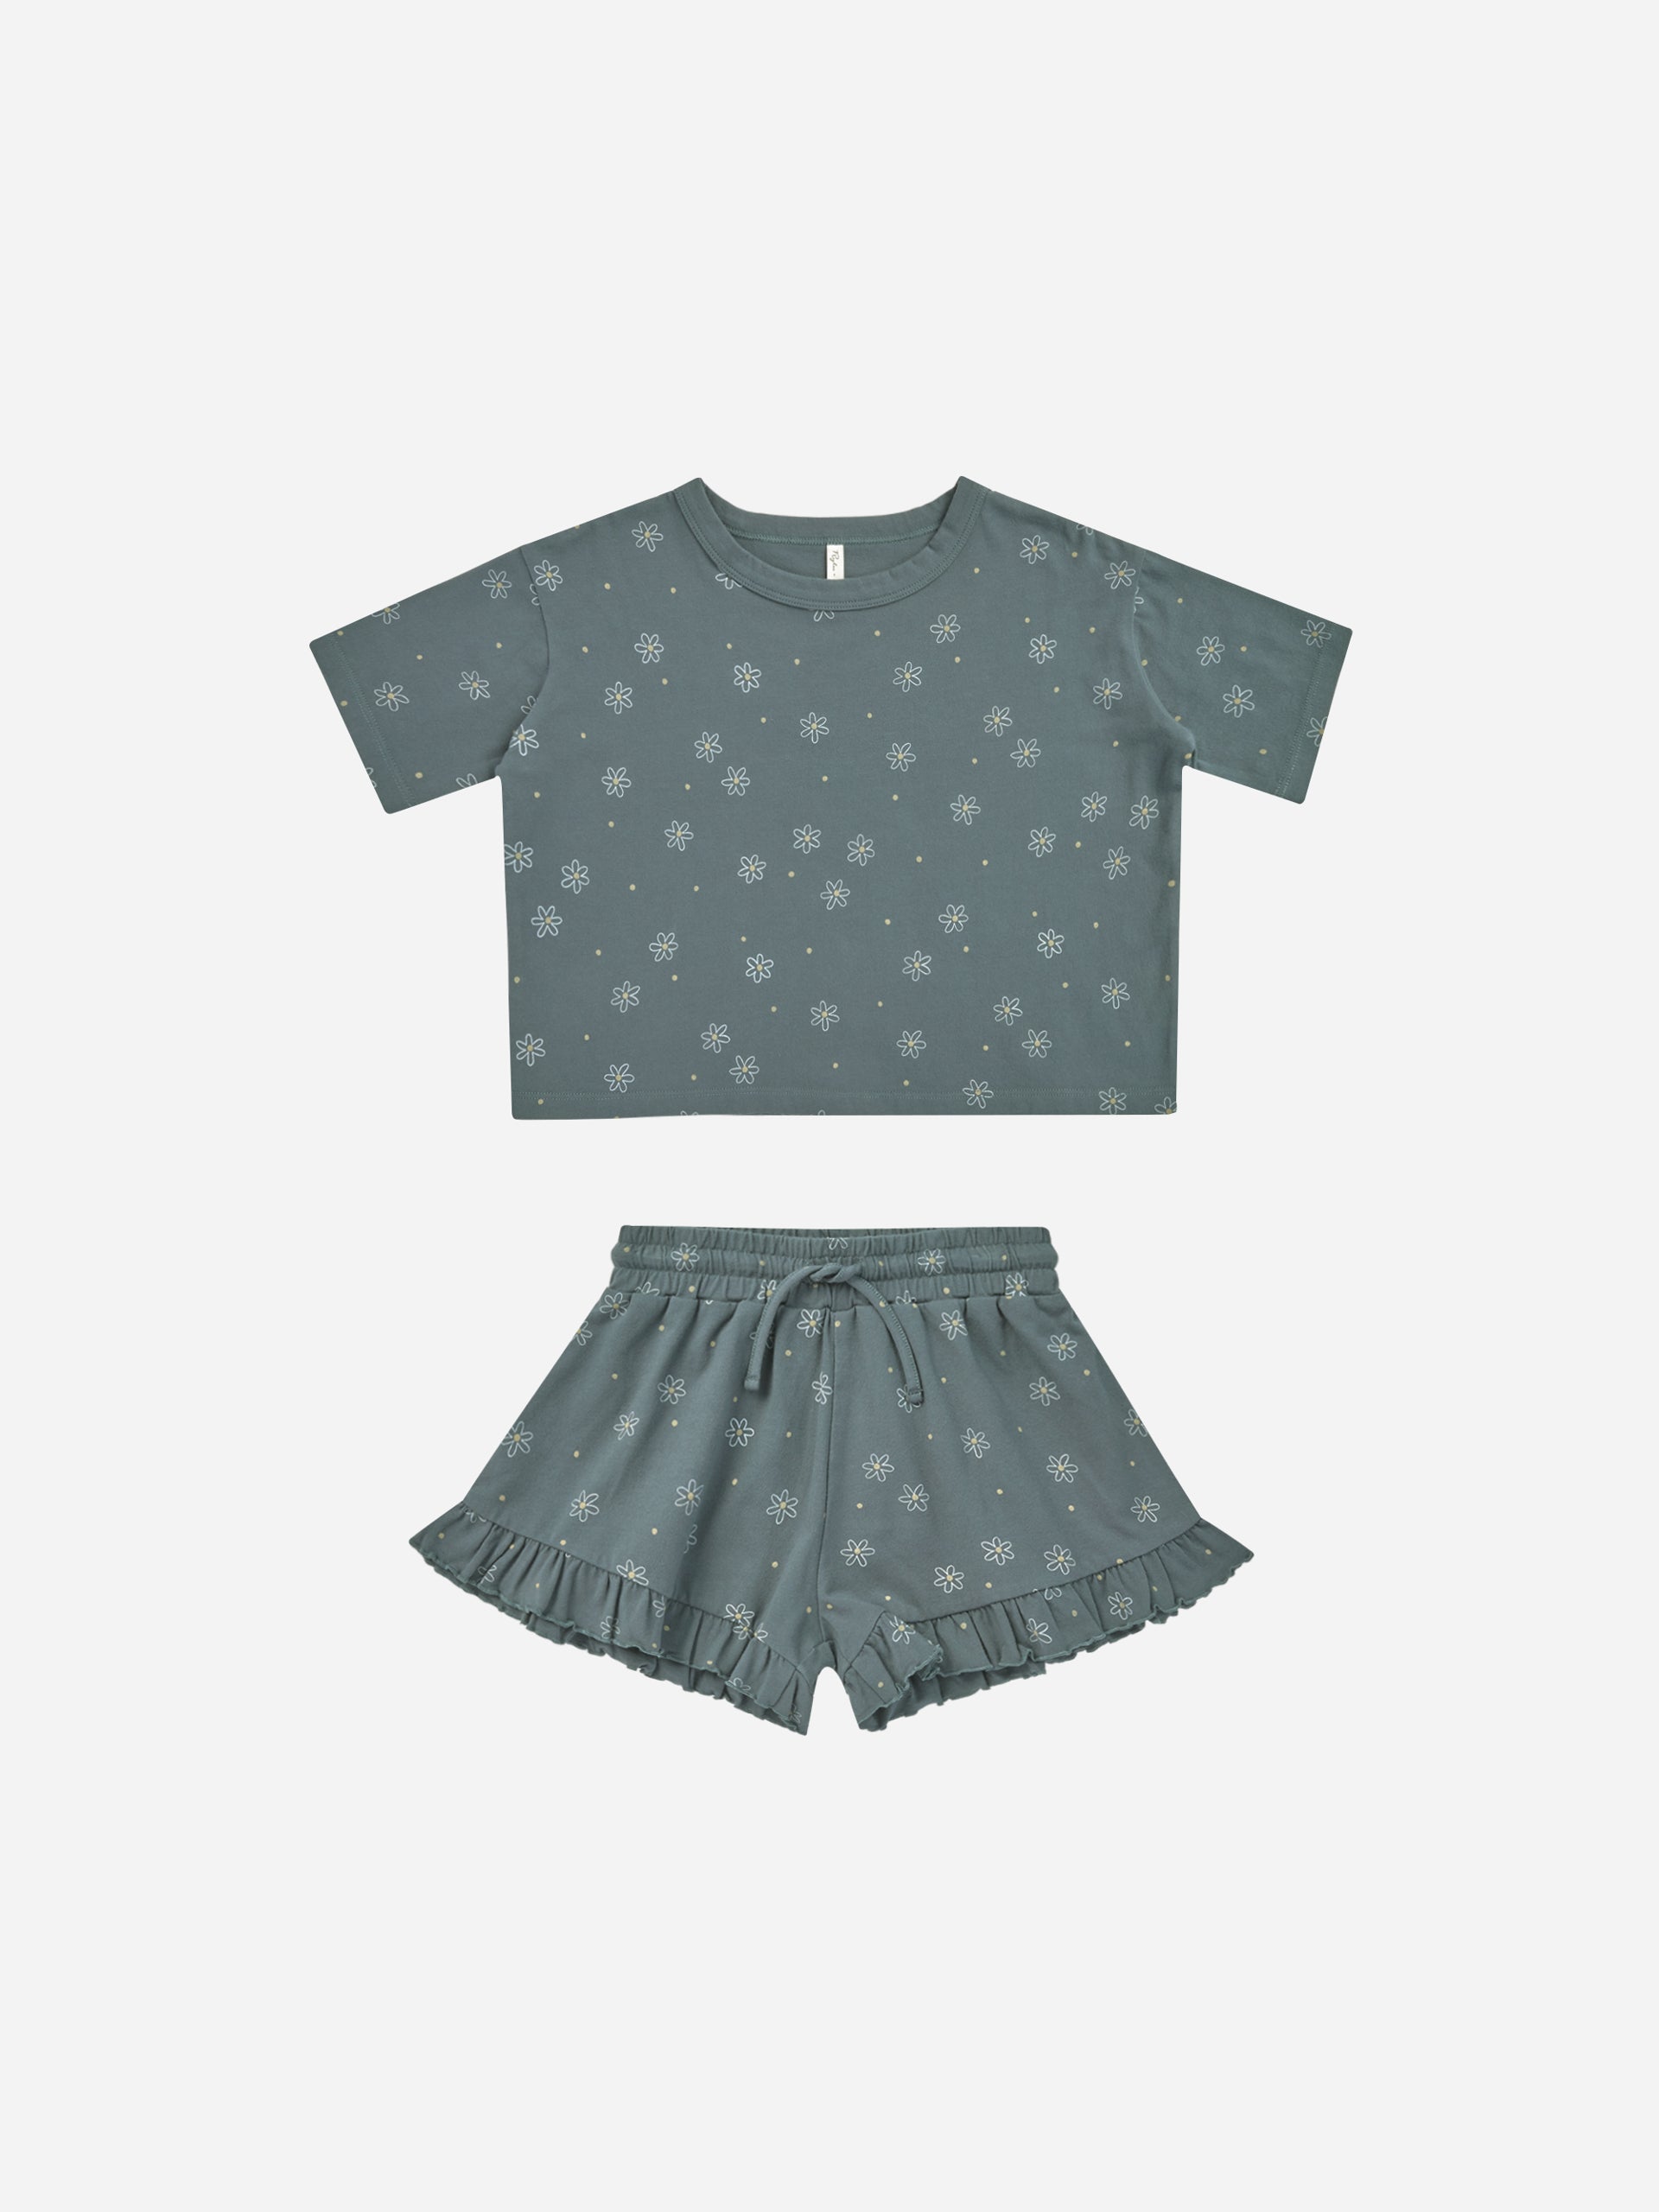 Mosie Set || Daisies - Rylee + Cru | Kids Clothes | Trendy Baby Clothes | Modern Infant Outfits |